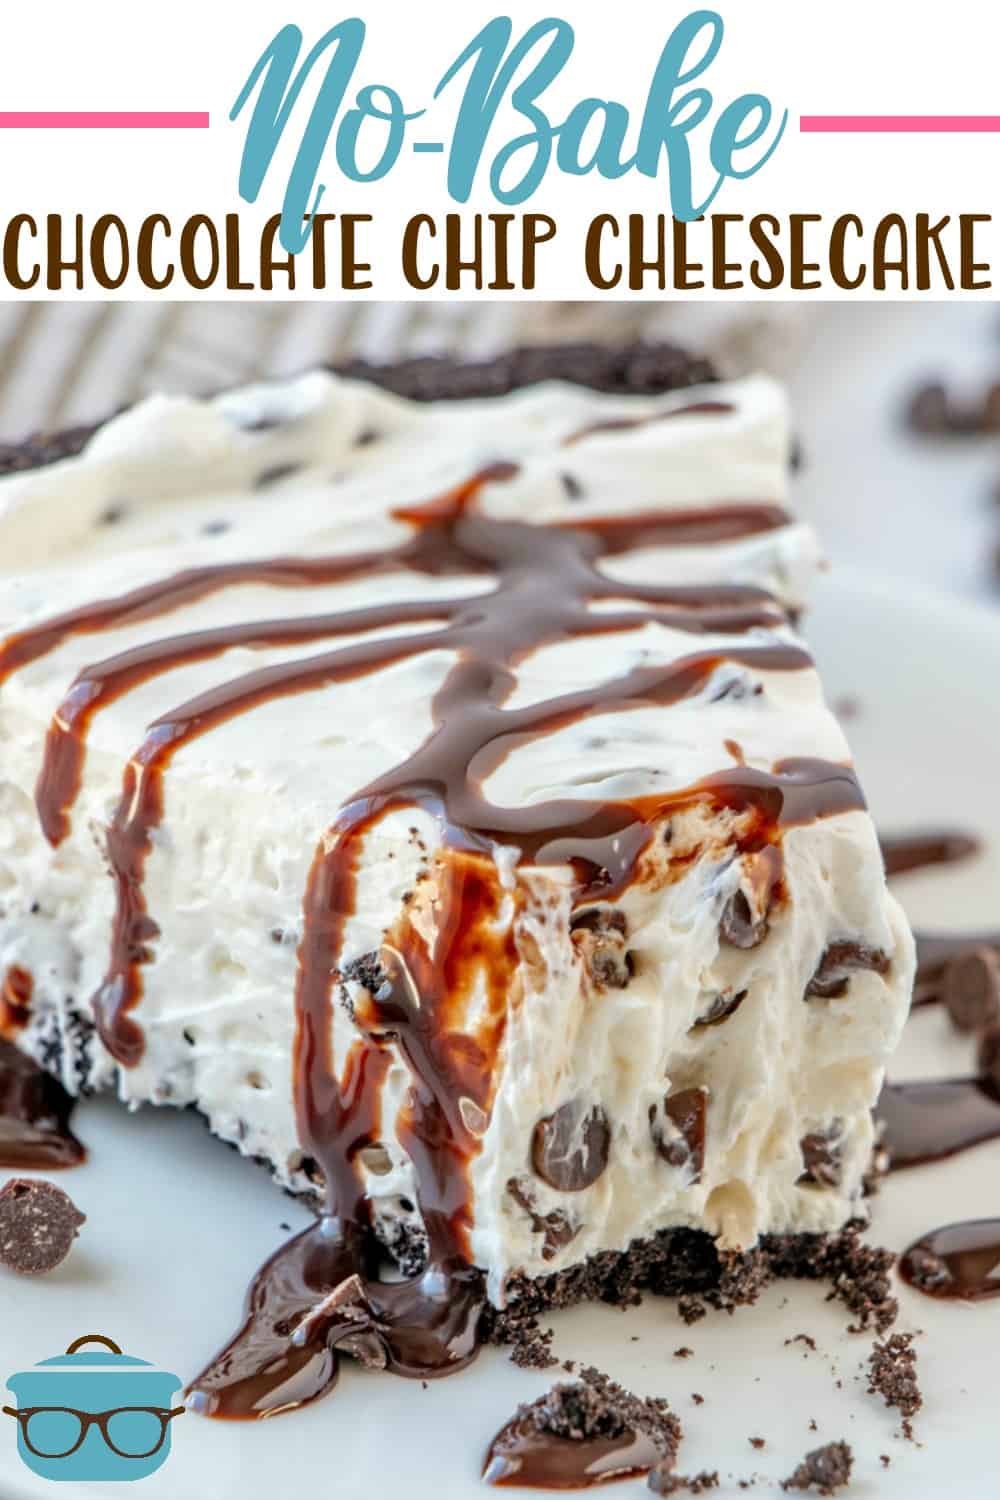 No-Bake Chocolate Chip Cheesecake recipe from The Country Cook.